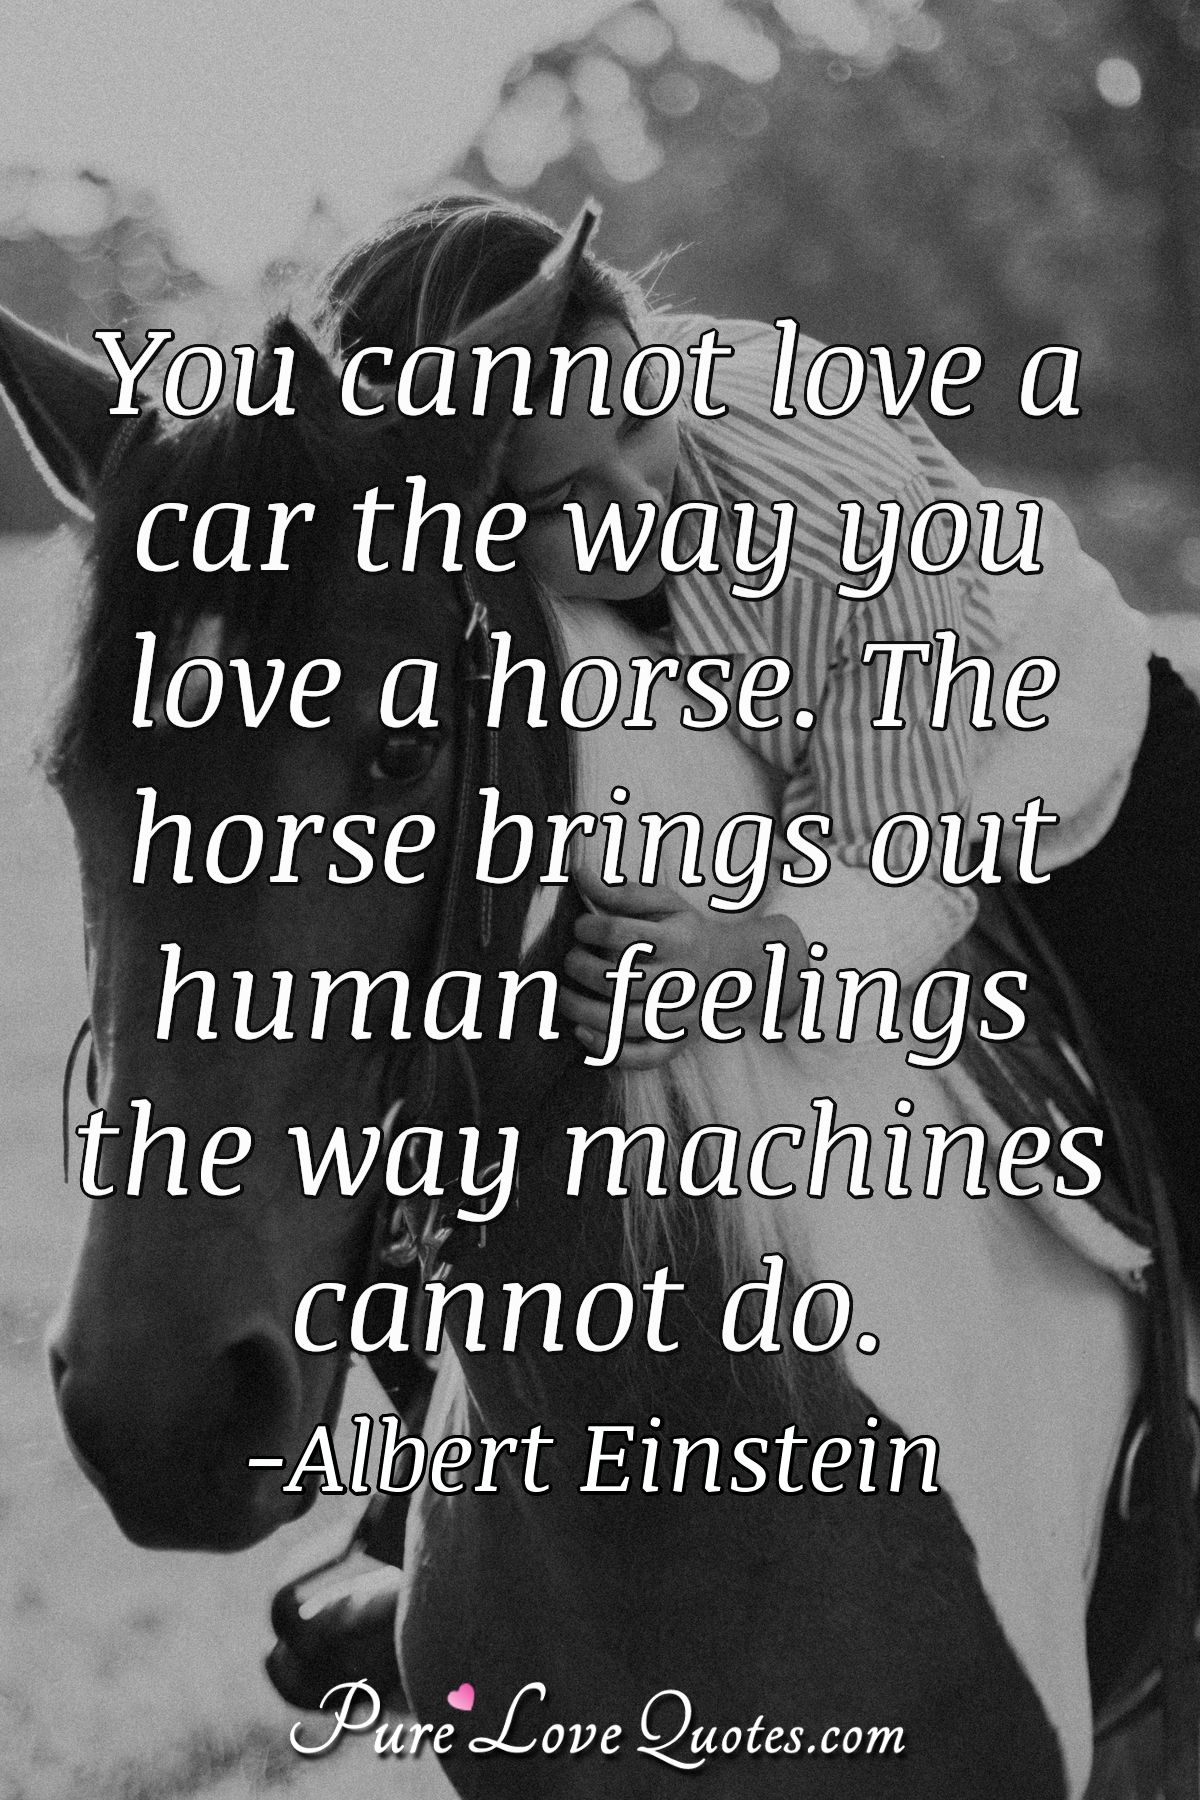 You cannot love a car the way you love a horse. The horse brings out human feelings the way machines cannot do.